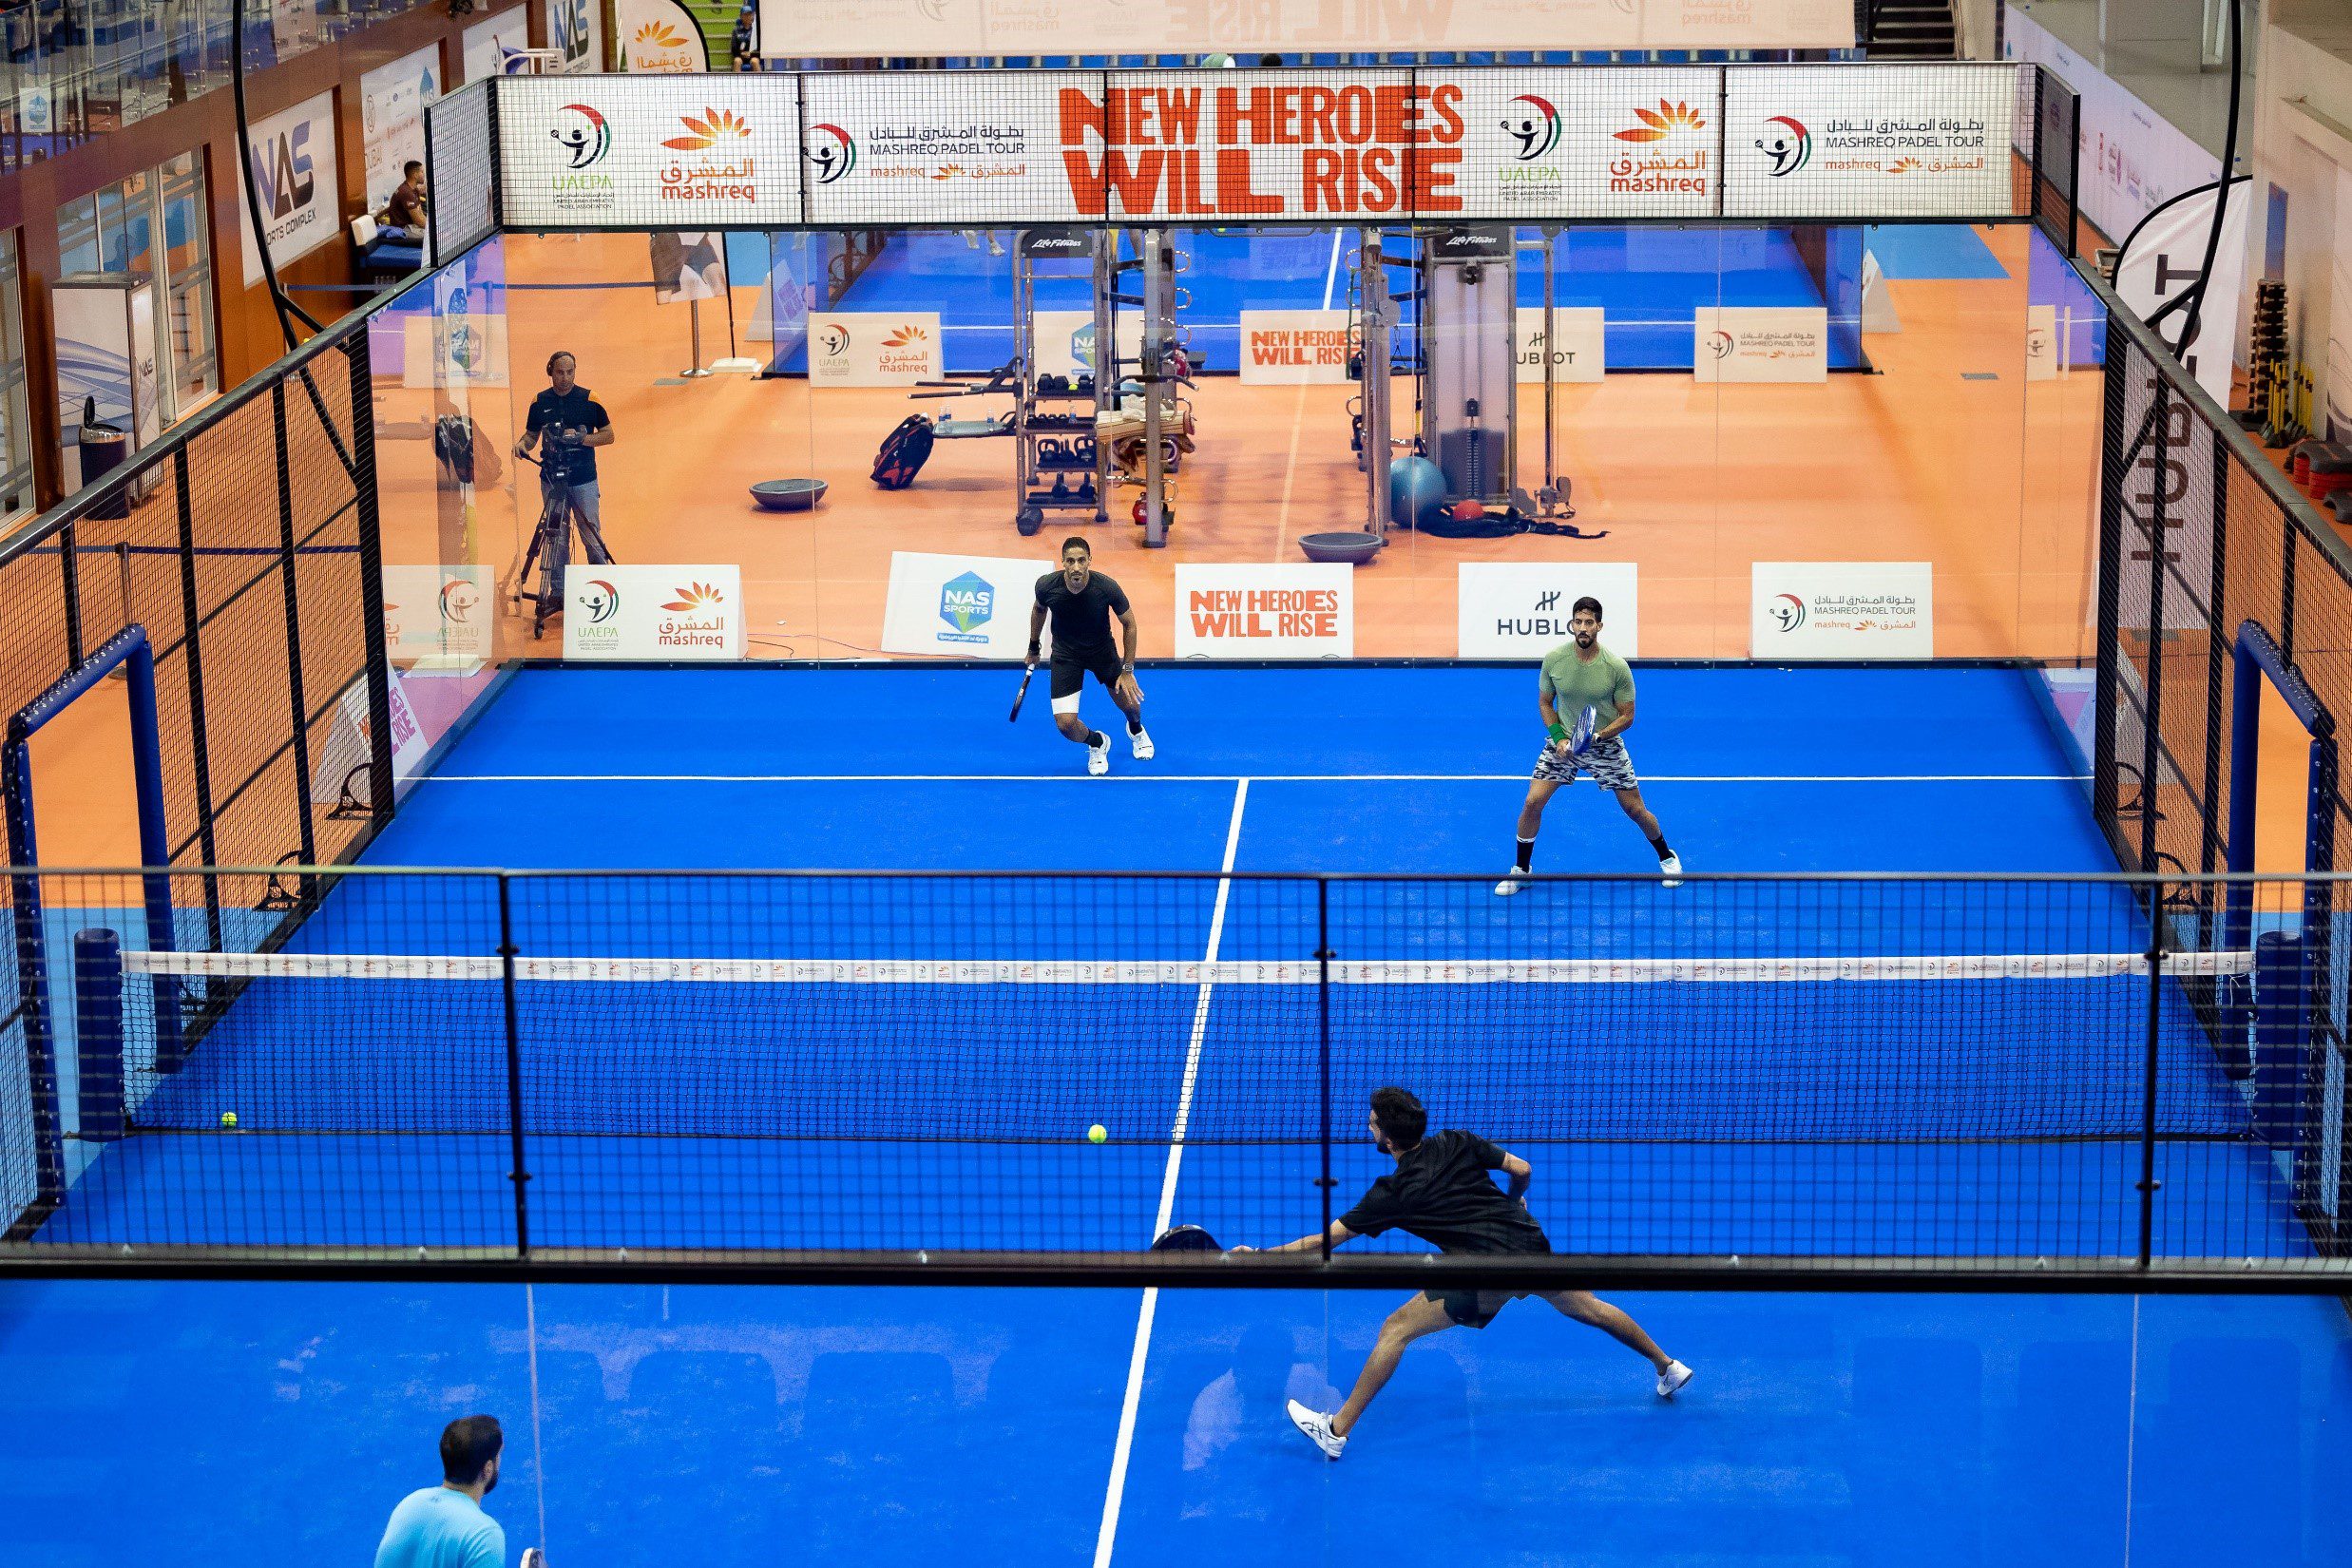 Padel enthusiasts can now submit their applications and join in on the action